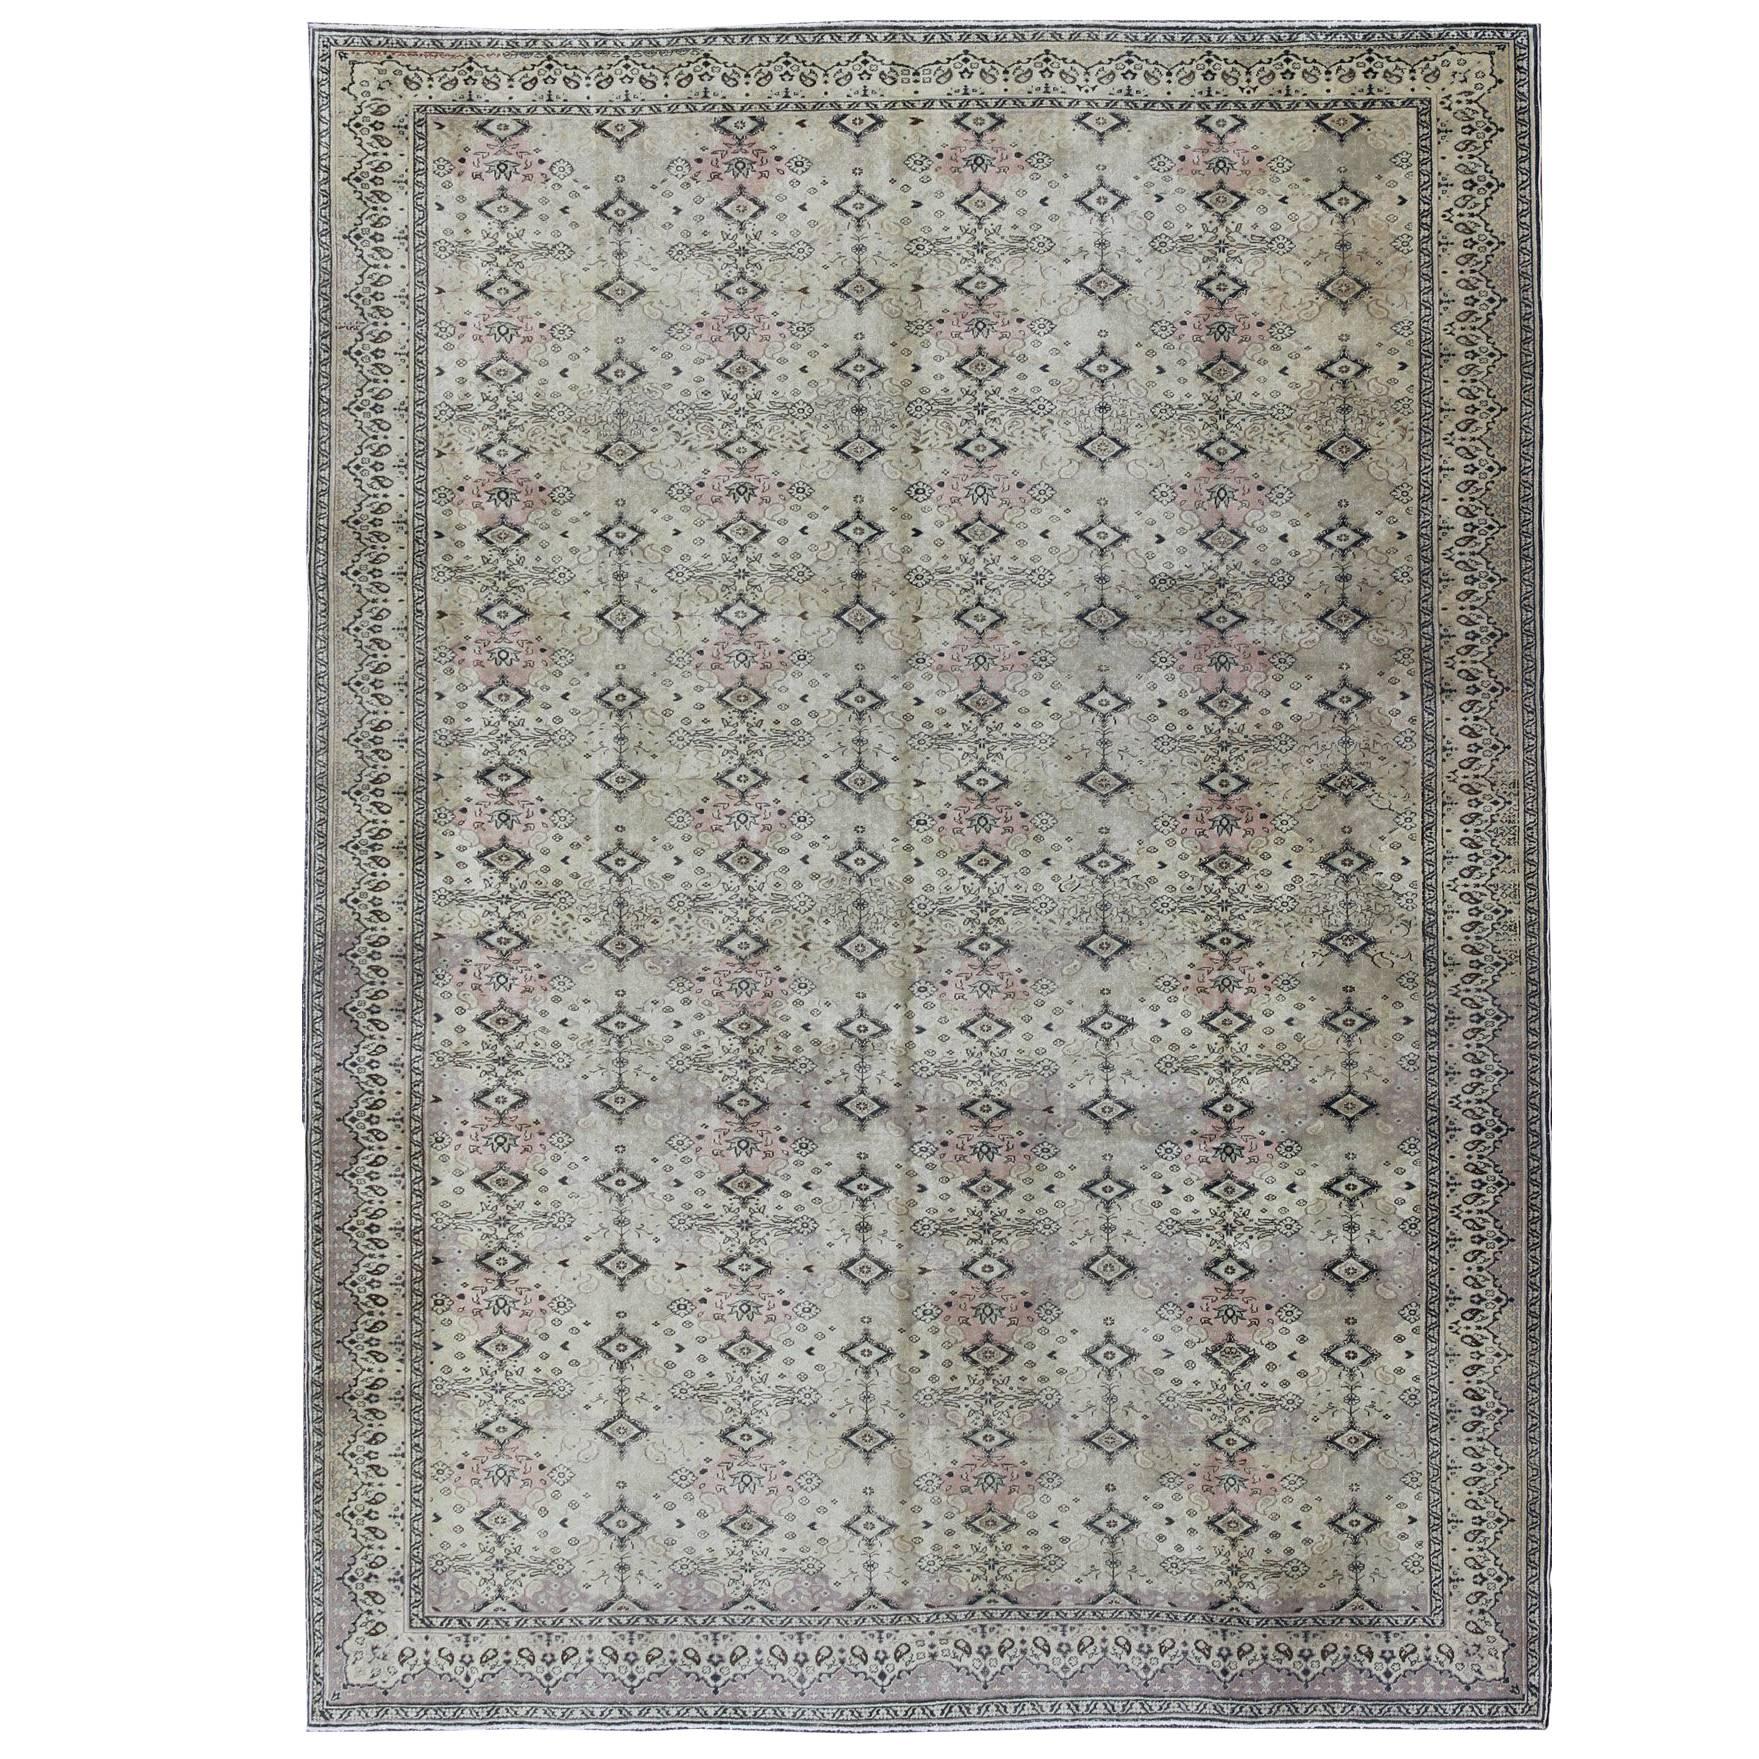 Large Turkish Sivas Rug with Repeating Diamond Motifs Set on Ivory Ground For Sale